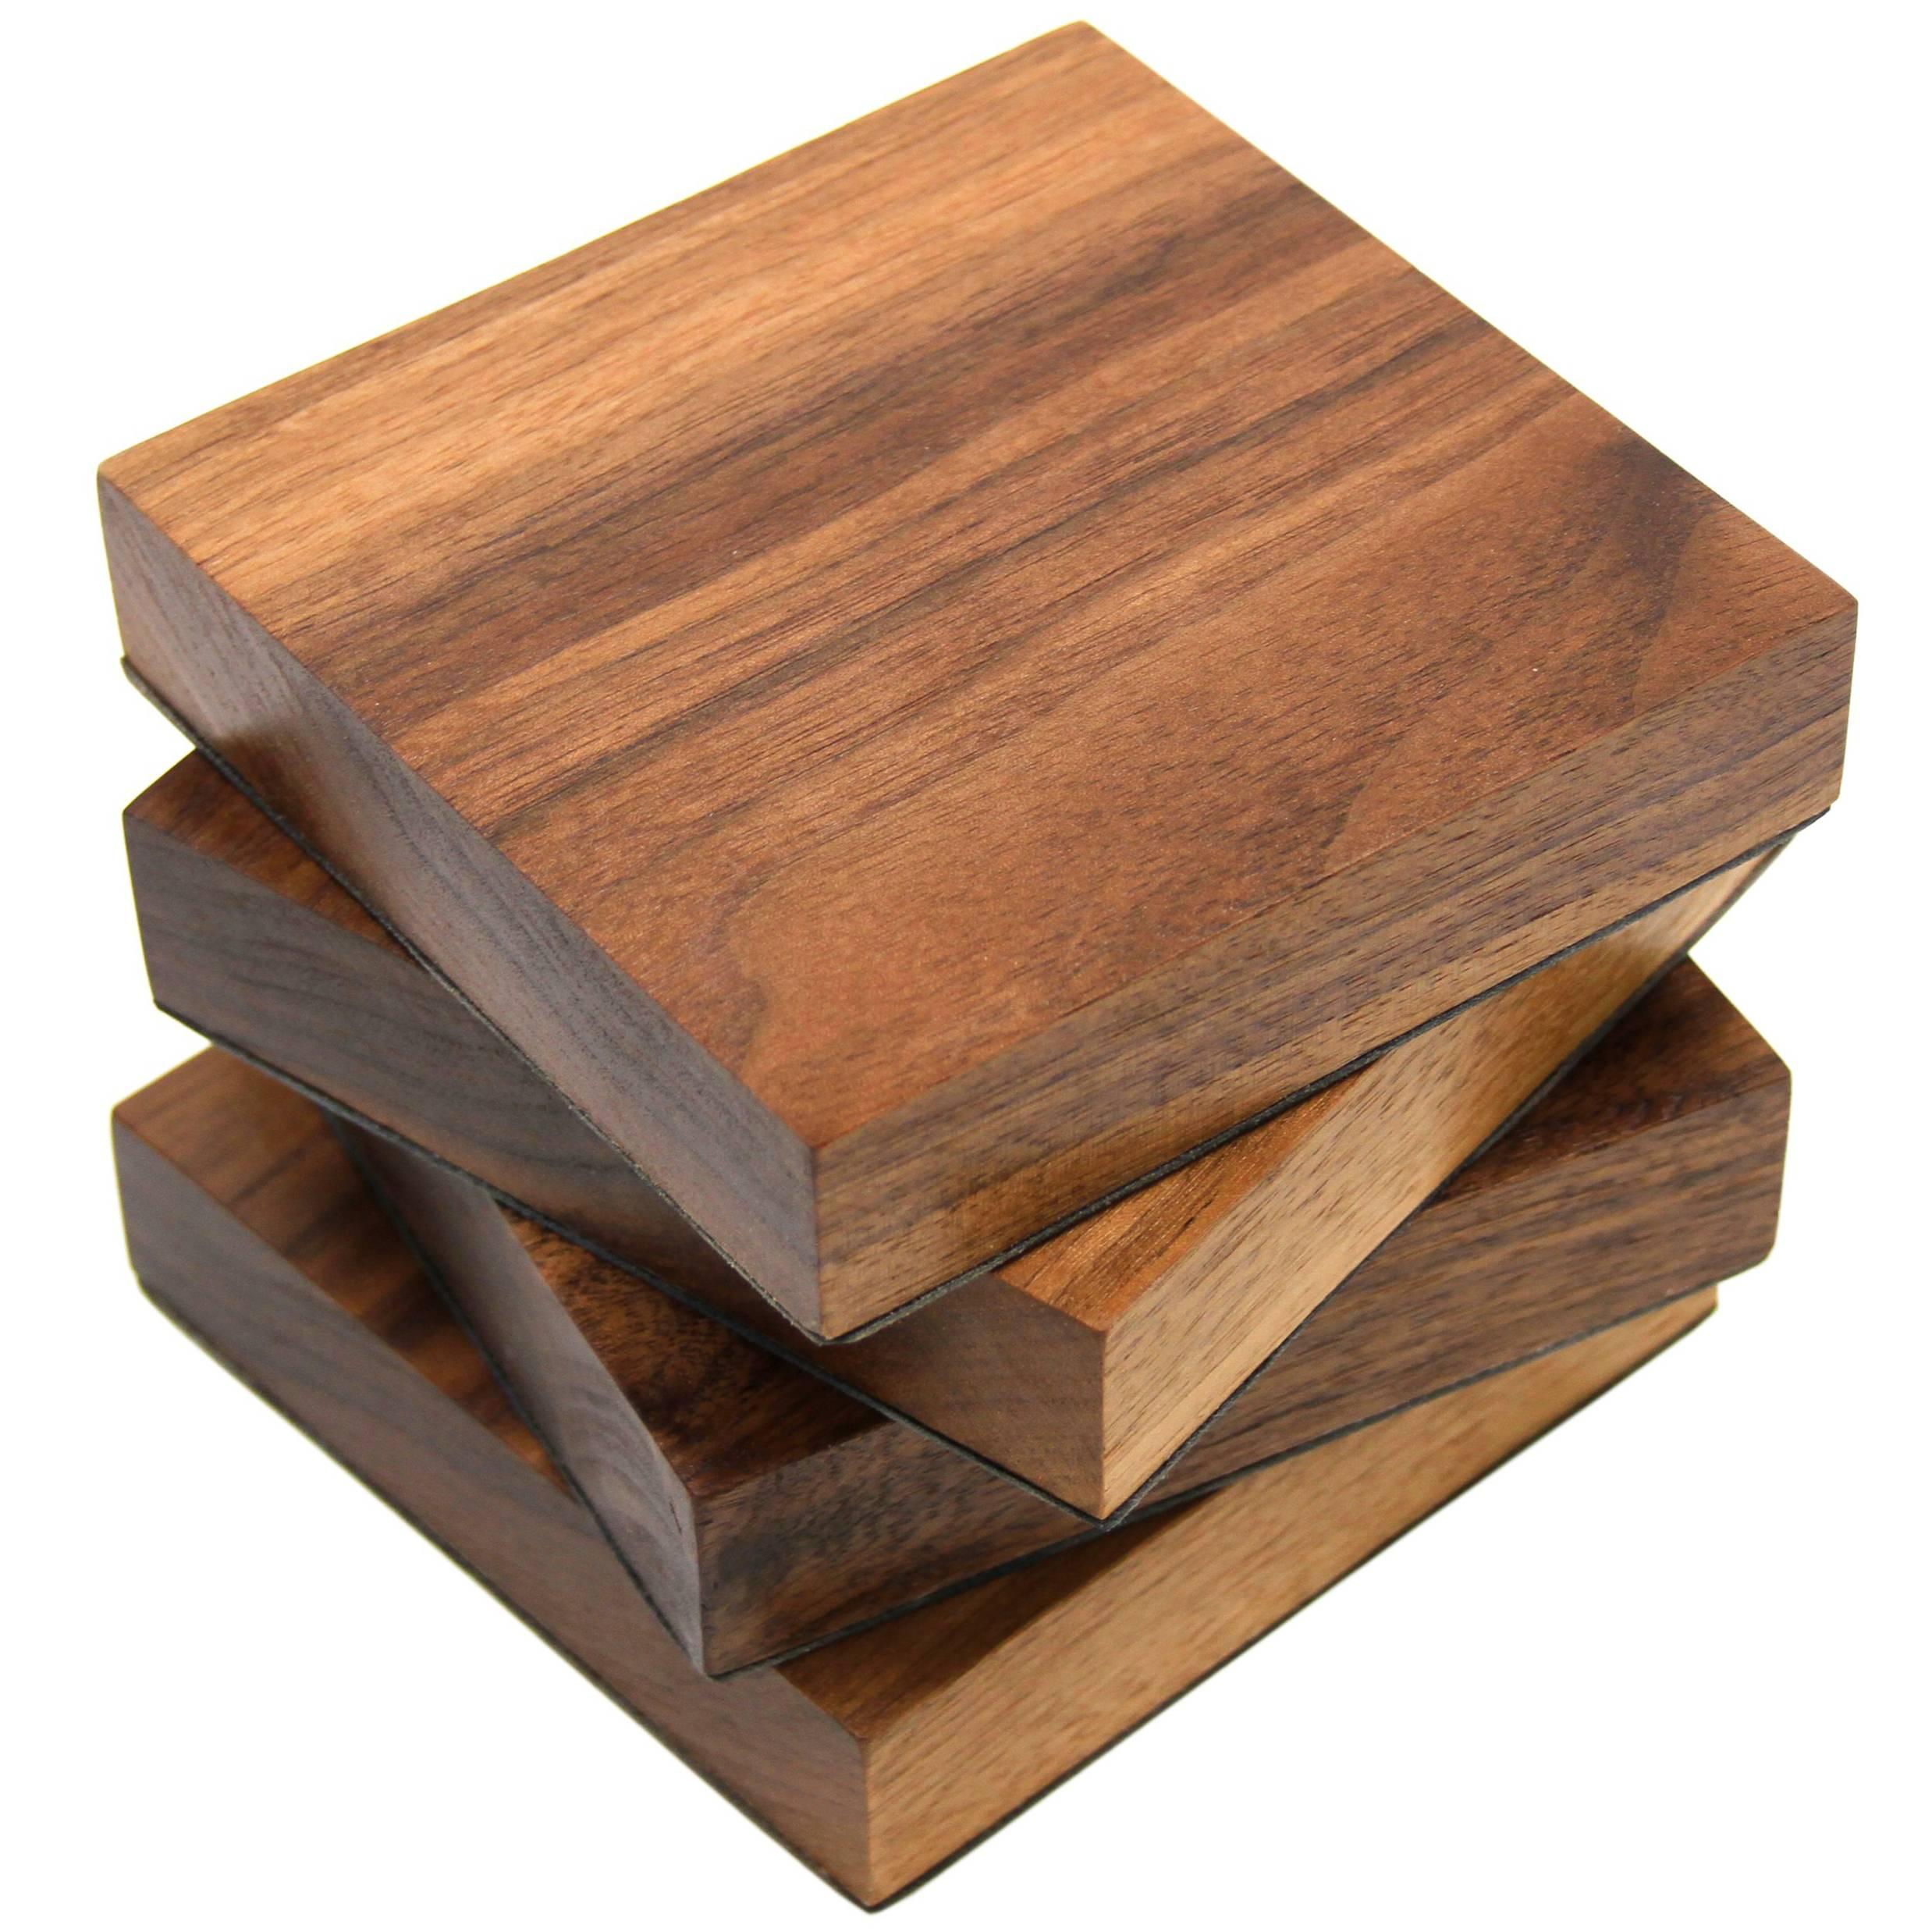 Four-Piece Coaster Set in Solid Walnut Wood and Lined with Lambskin